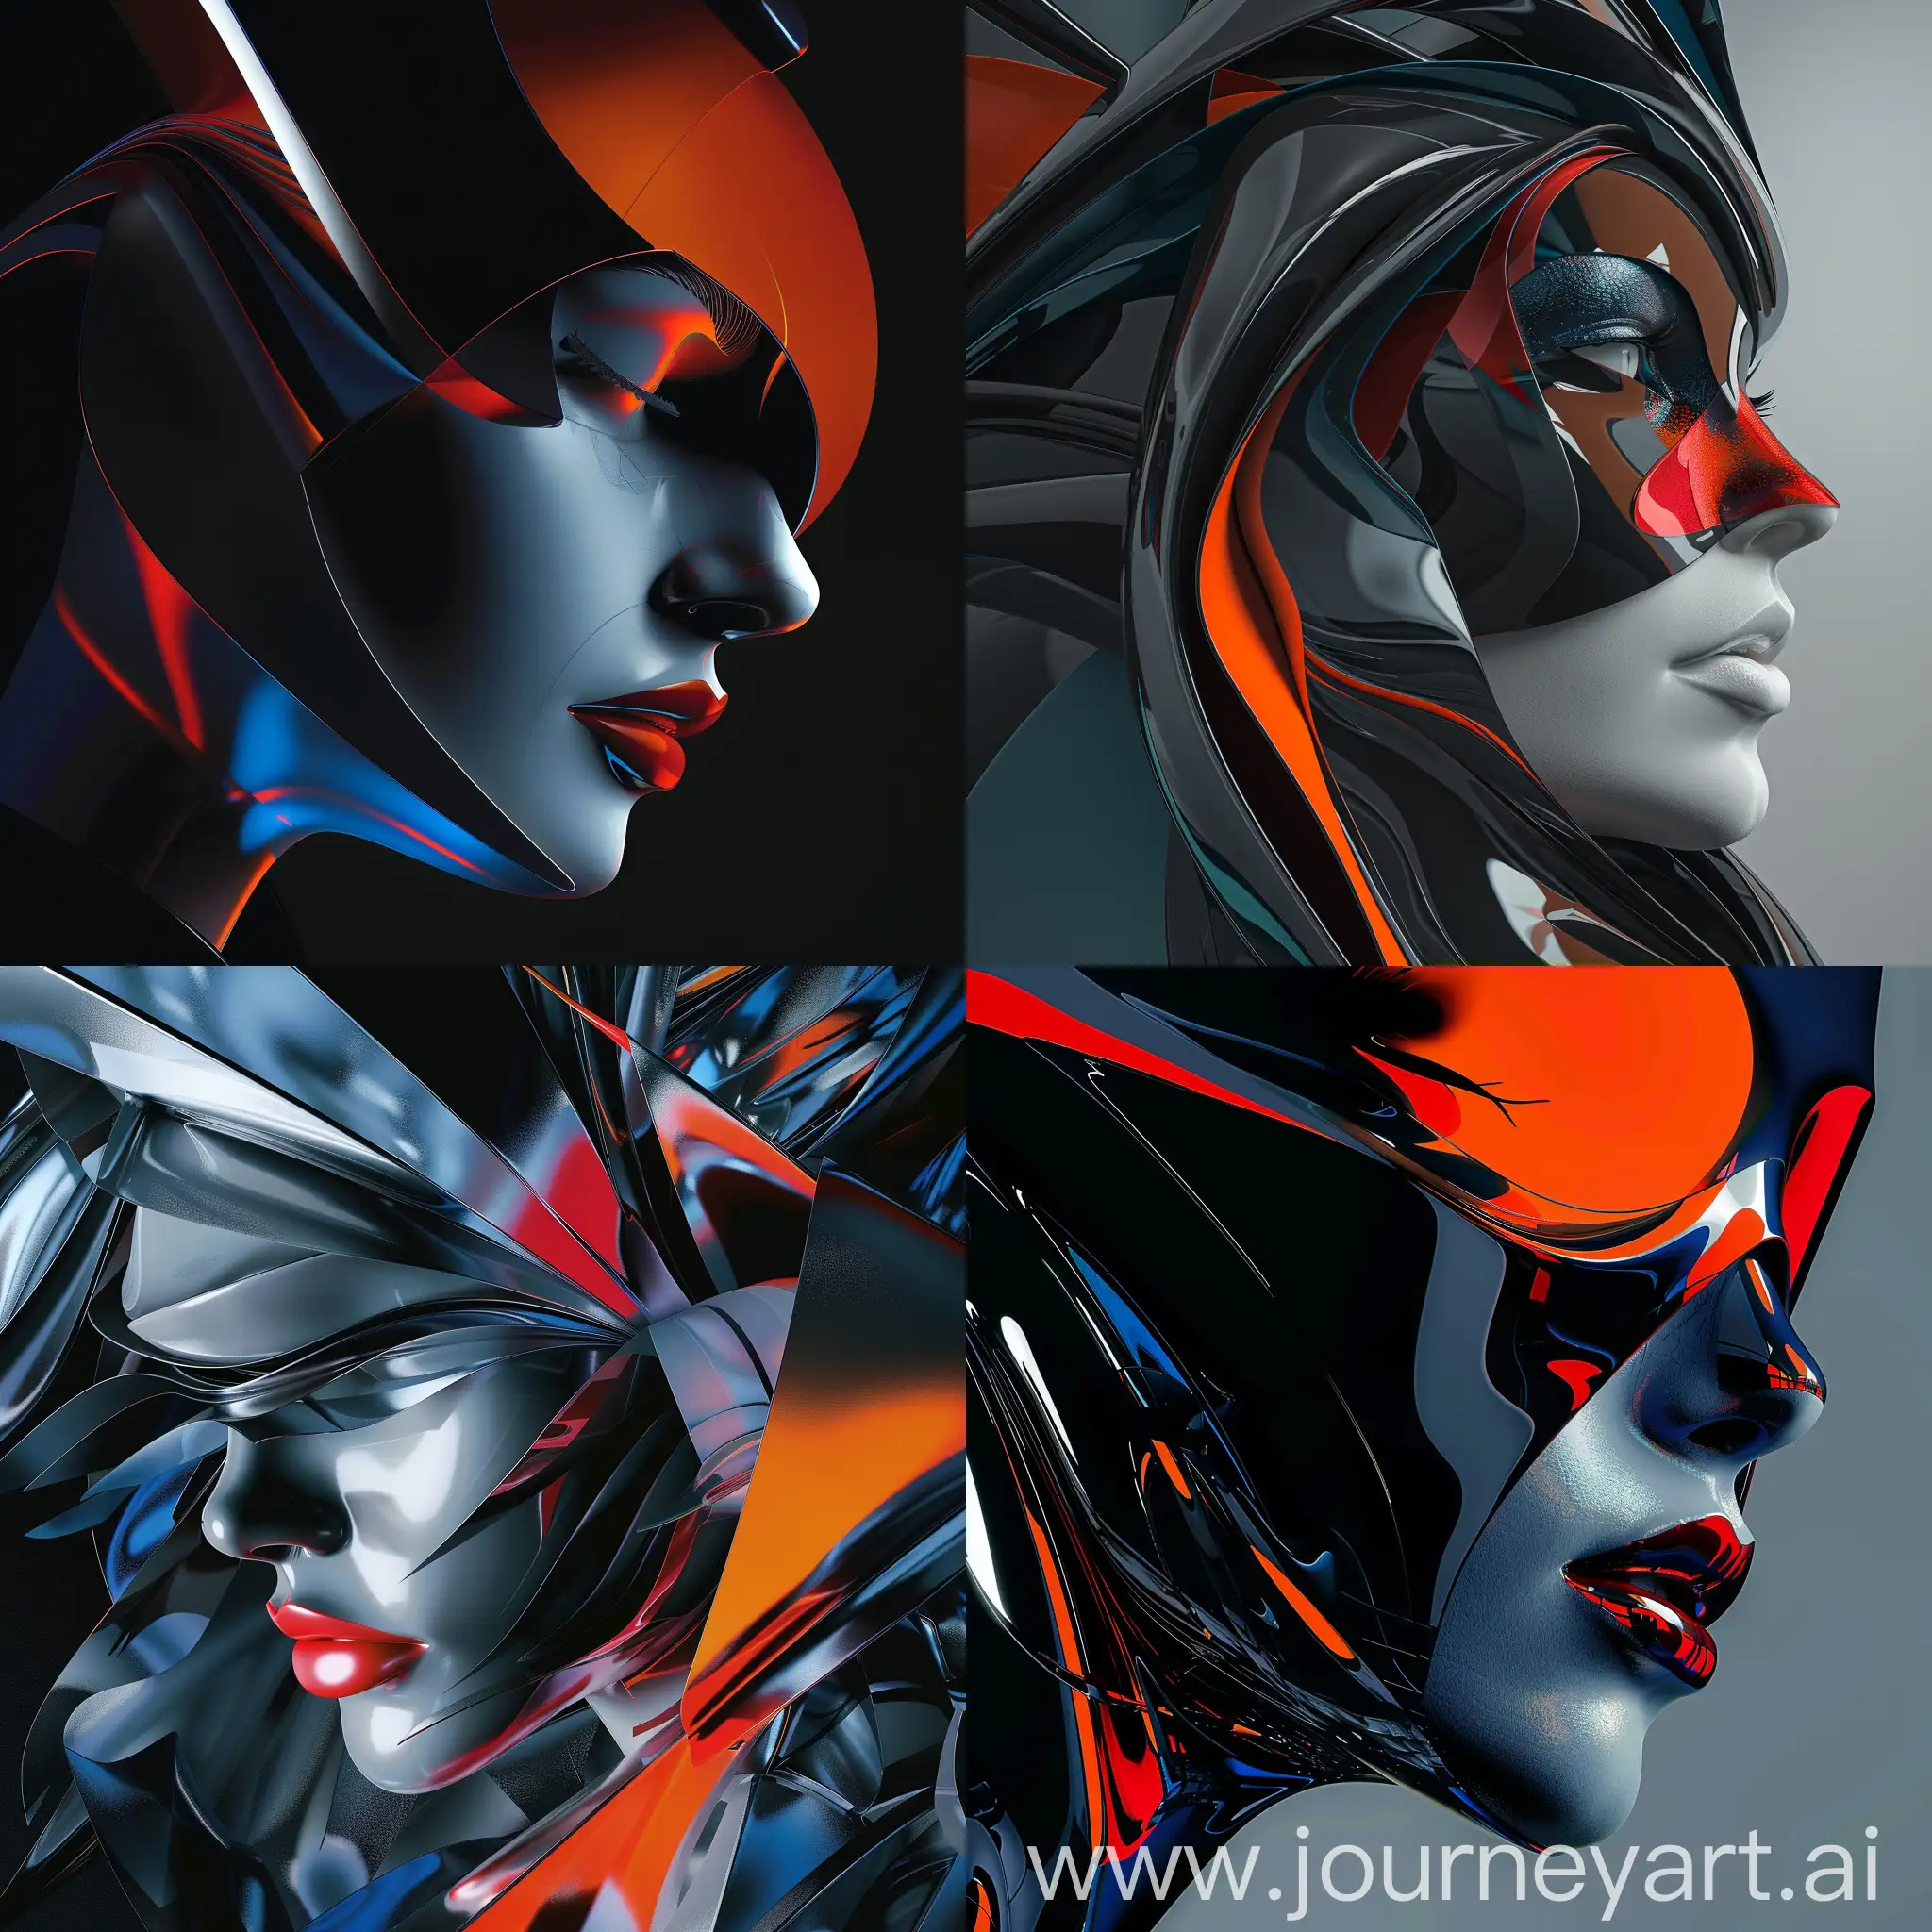  modern abstract design portrait woman with red, black and blue colors, in 3d style, chrome highlights, intense close-ups, Naum Gabo, subtle tonal changes, dark silver and orange, details hyper realistic 